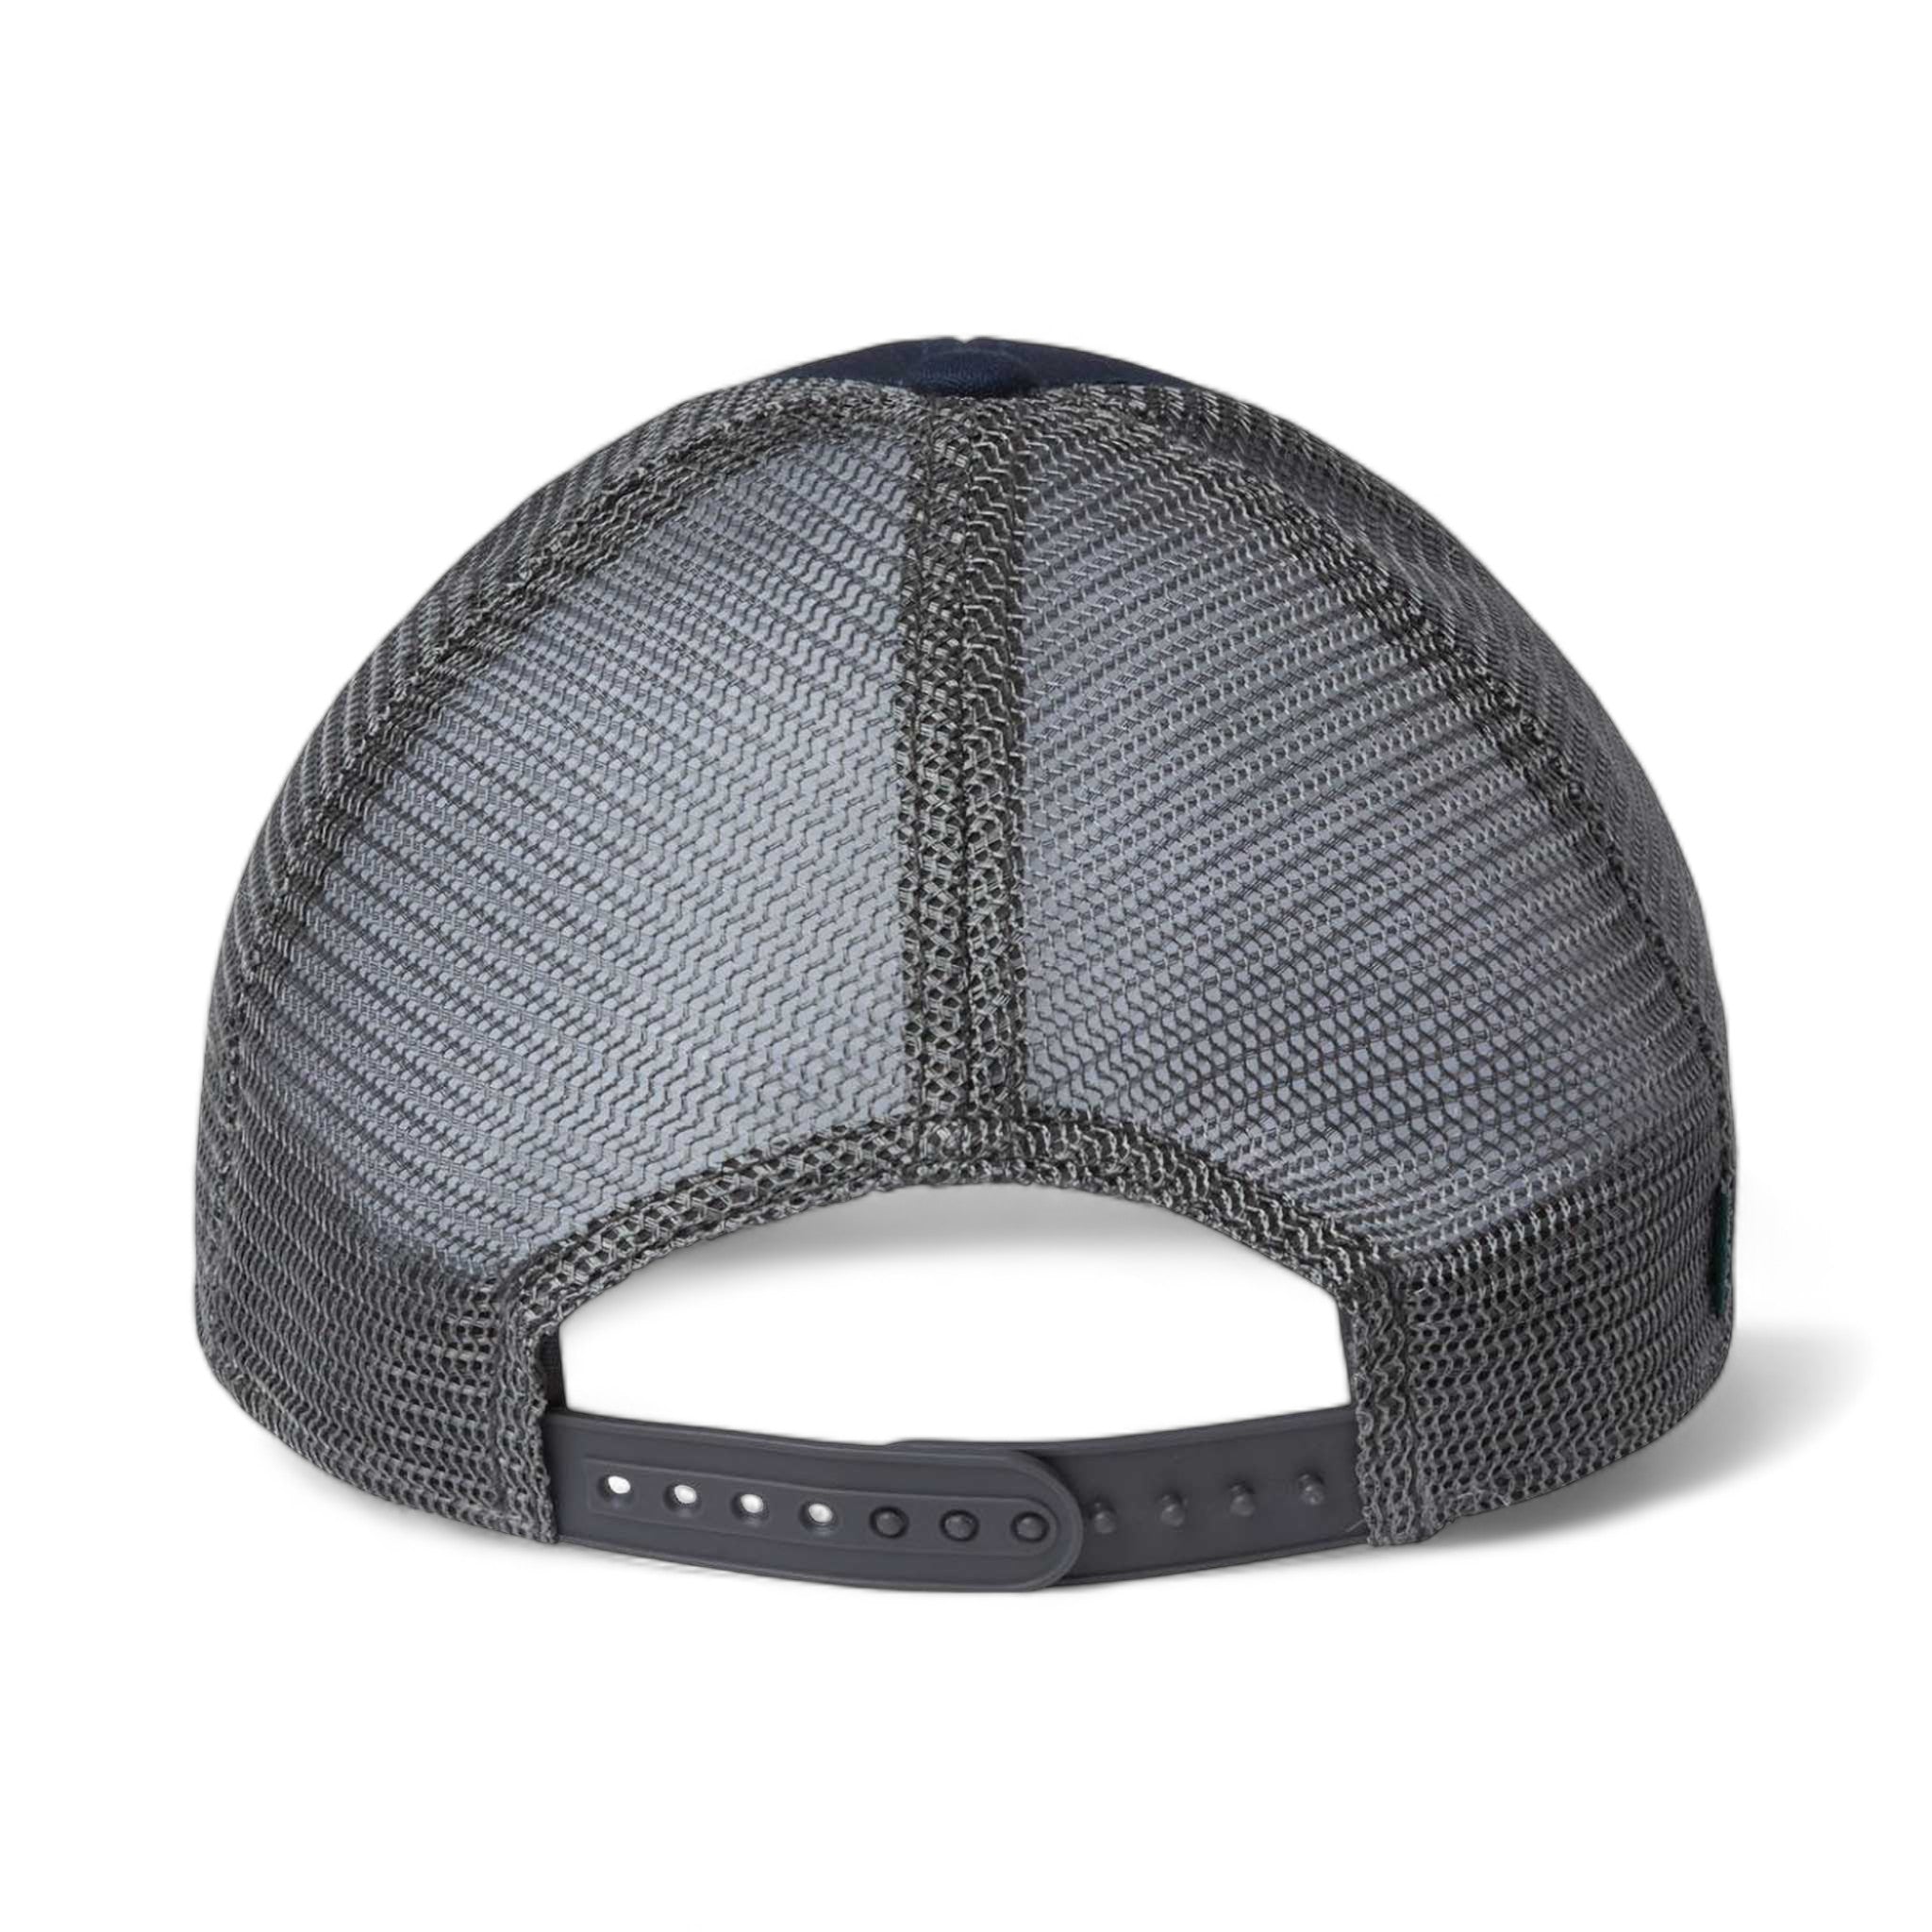 Back view of LEGACY LPS custom hat in navy and dark grey